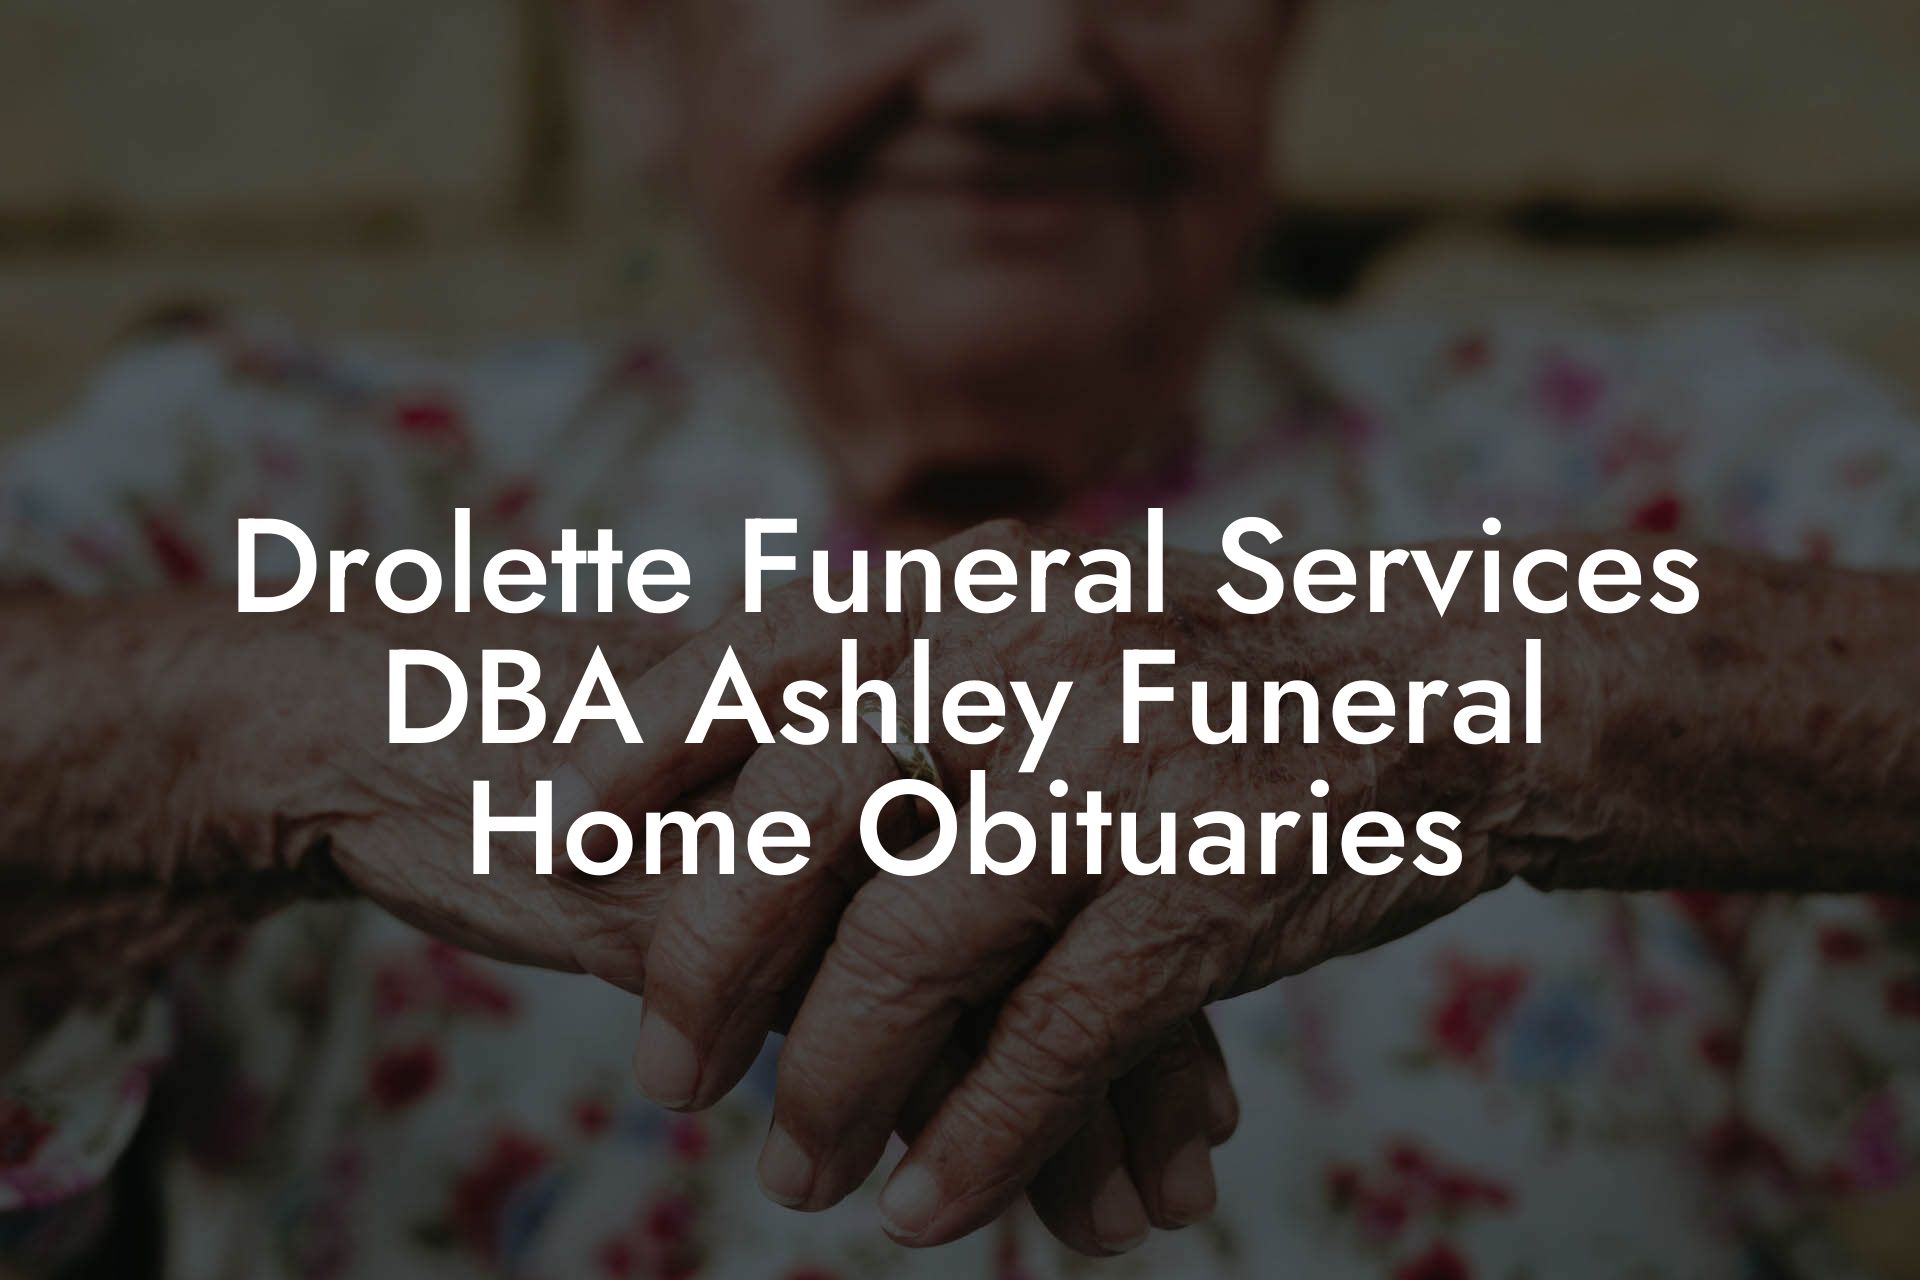 Drolette Funeral Services DBA Ashley Funeral Home Obituaries